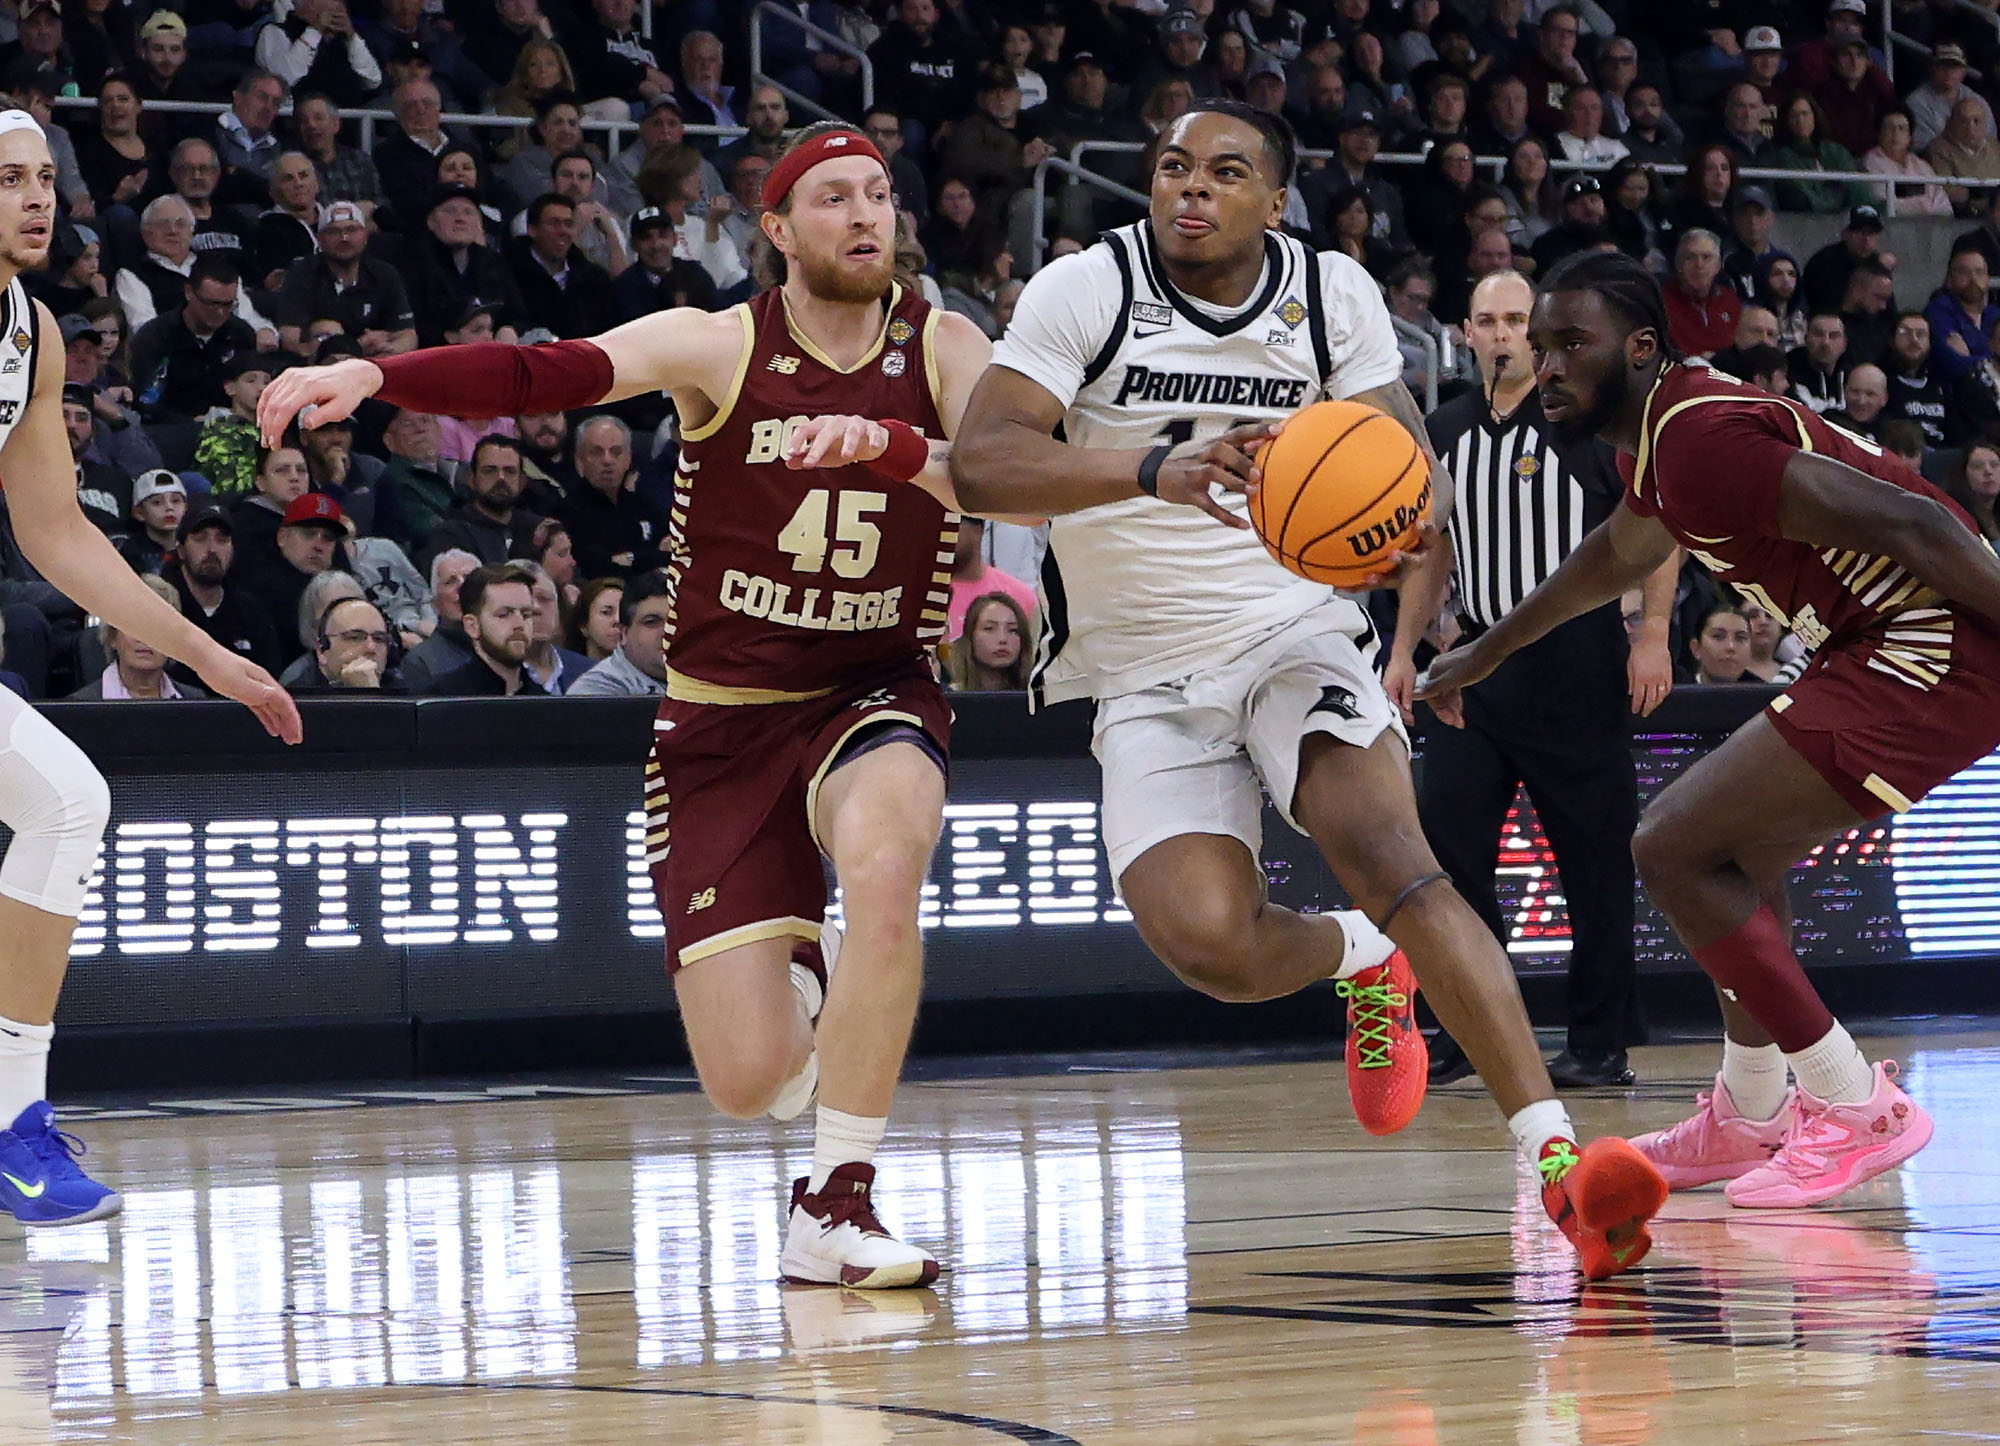 Friars knocked out of NIT, busy portal season awaits